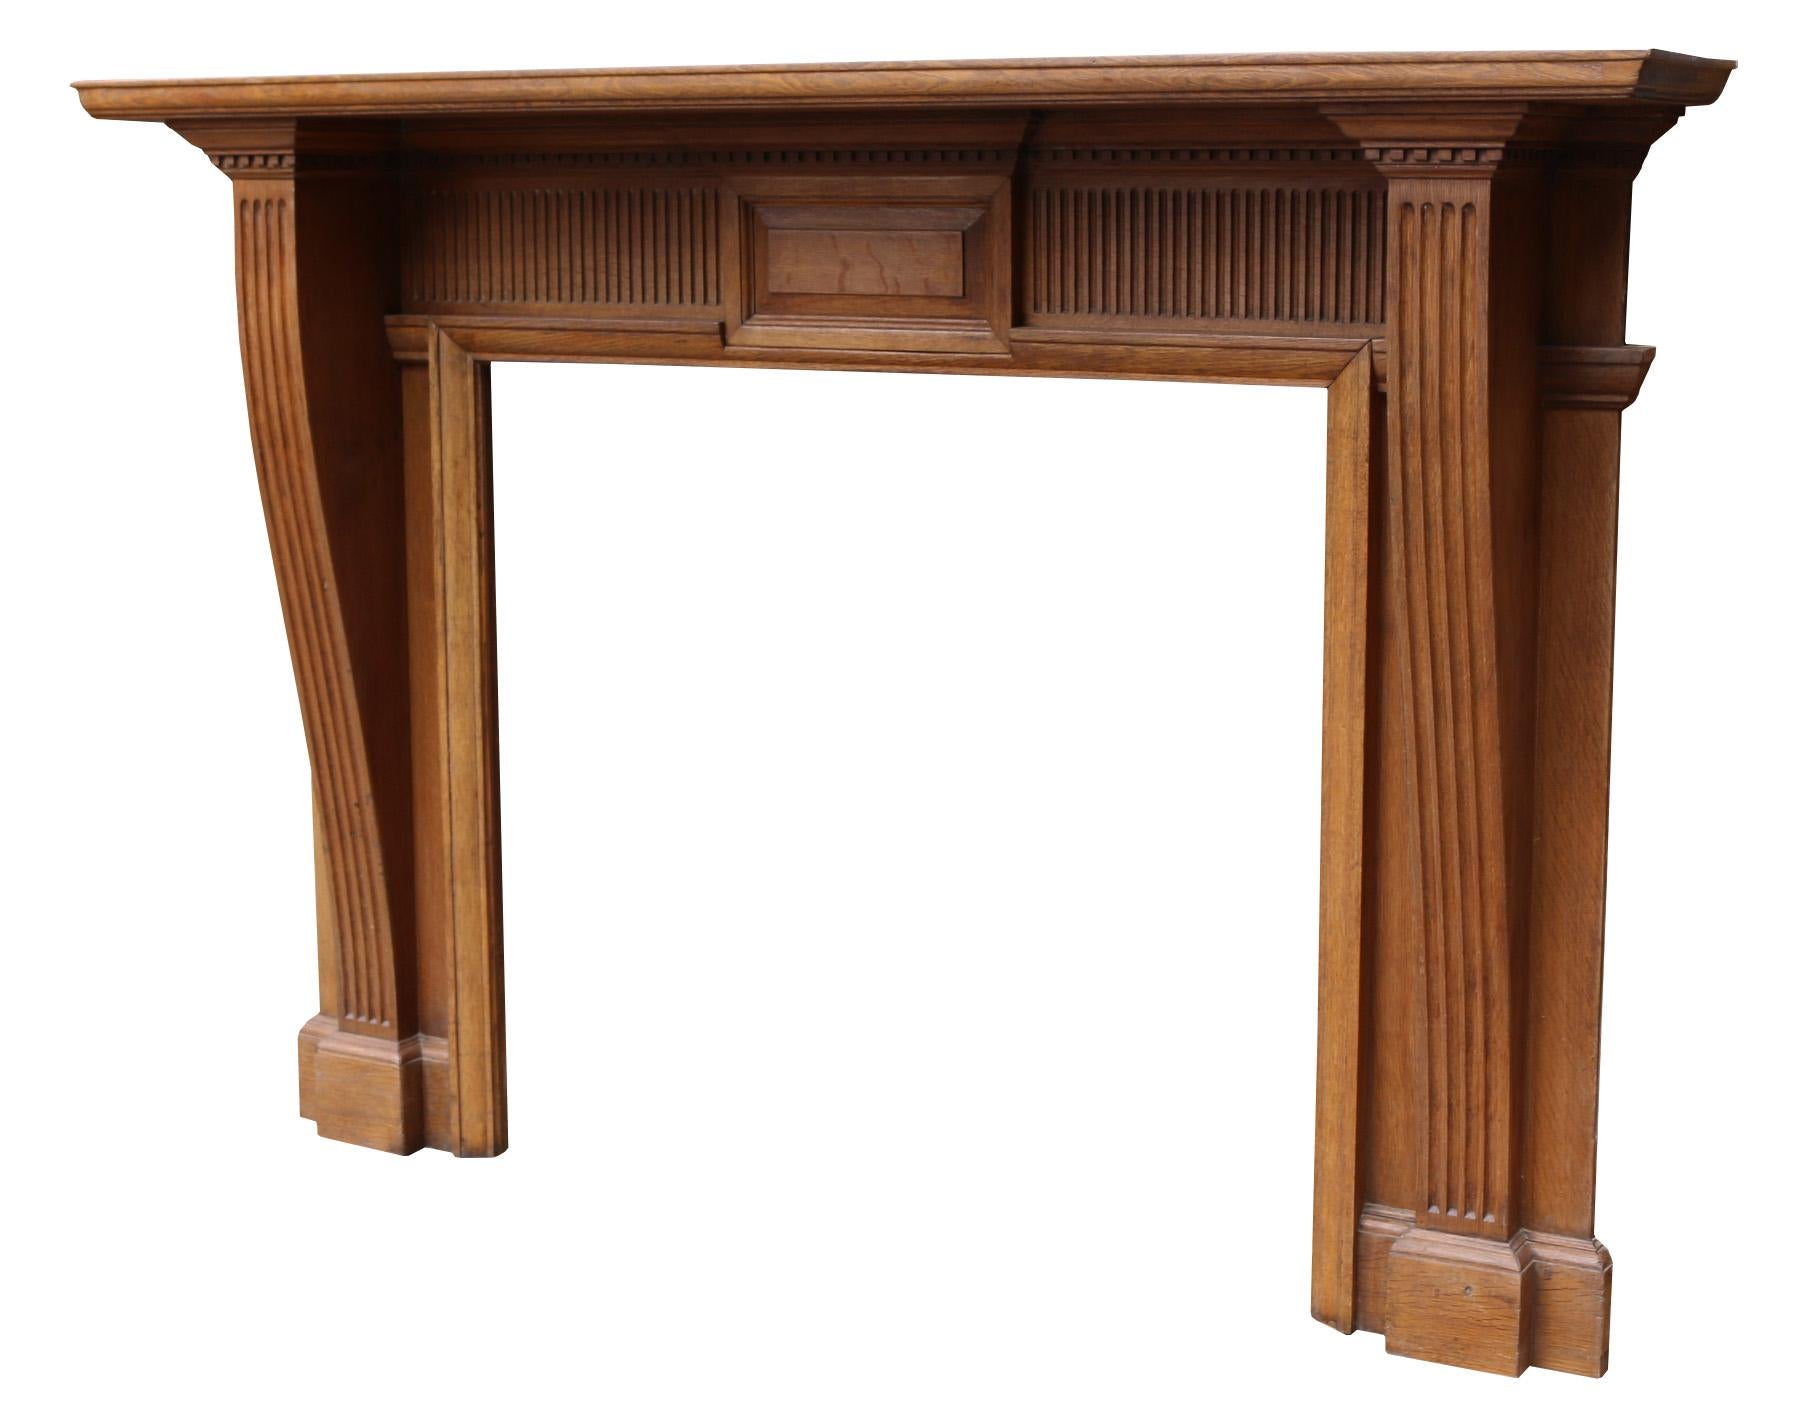 Victorian Oak Fire Mantel In Good Condition For Sale In Wormelow, Herefordshire